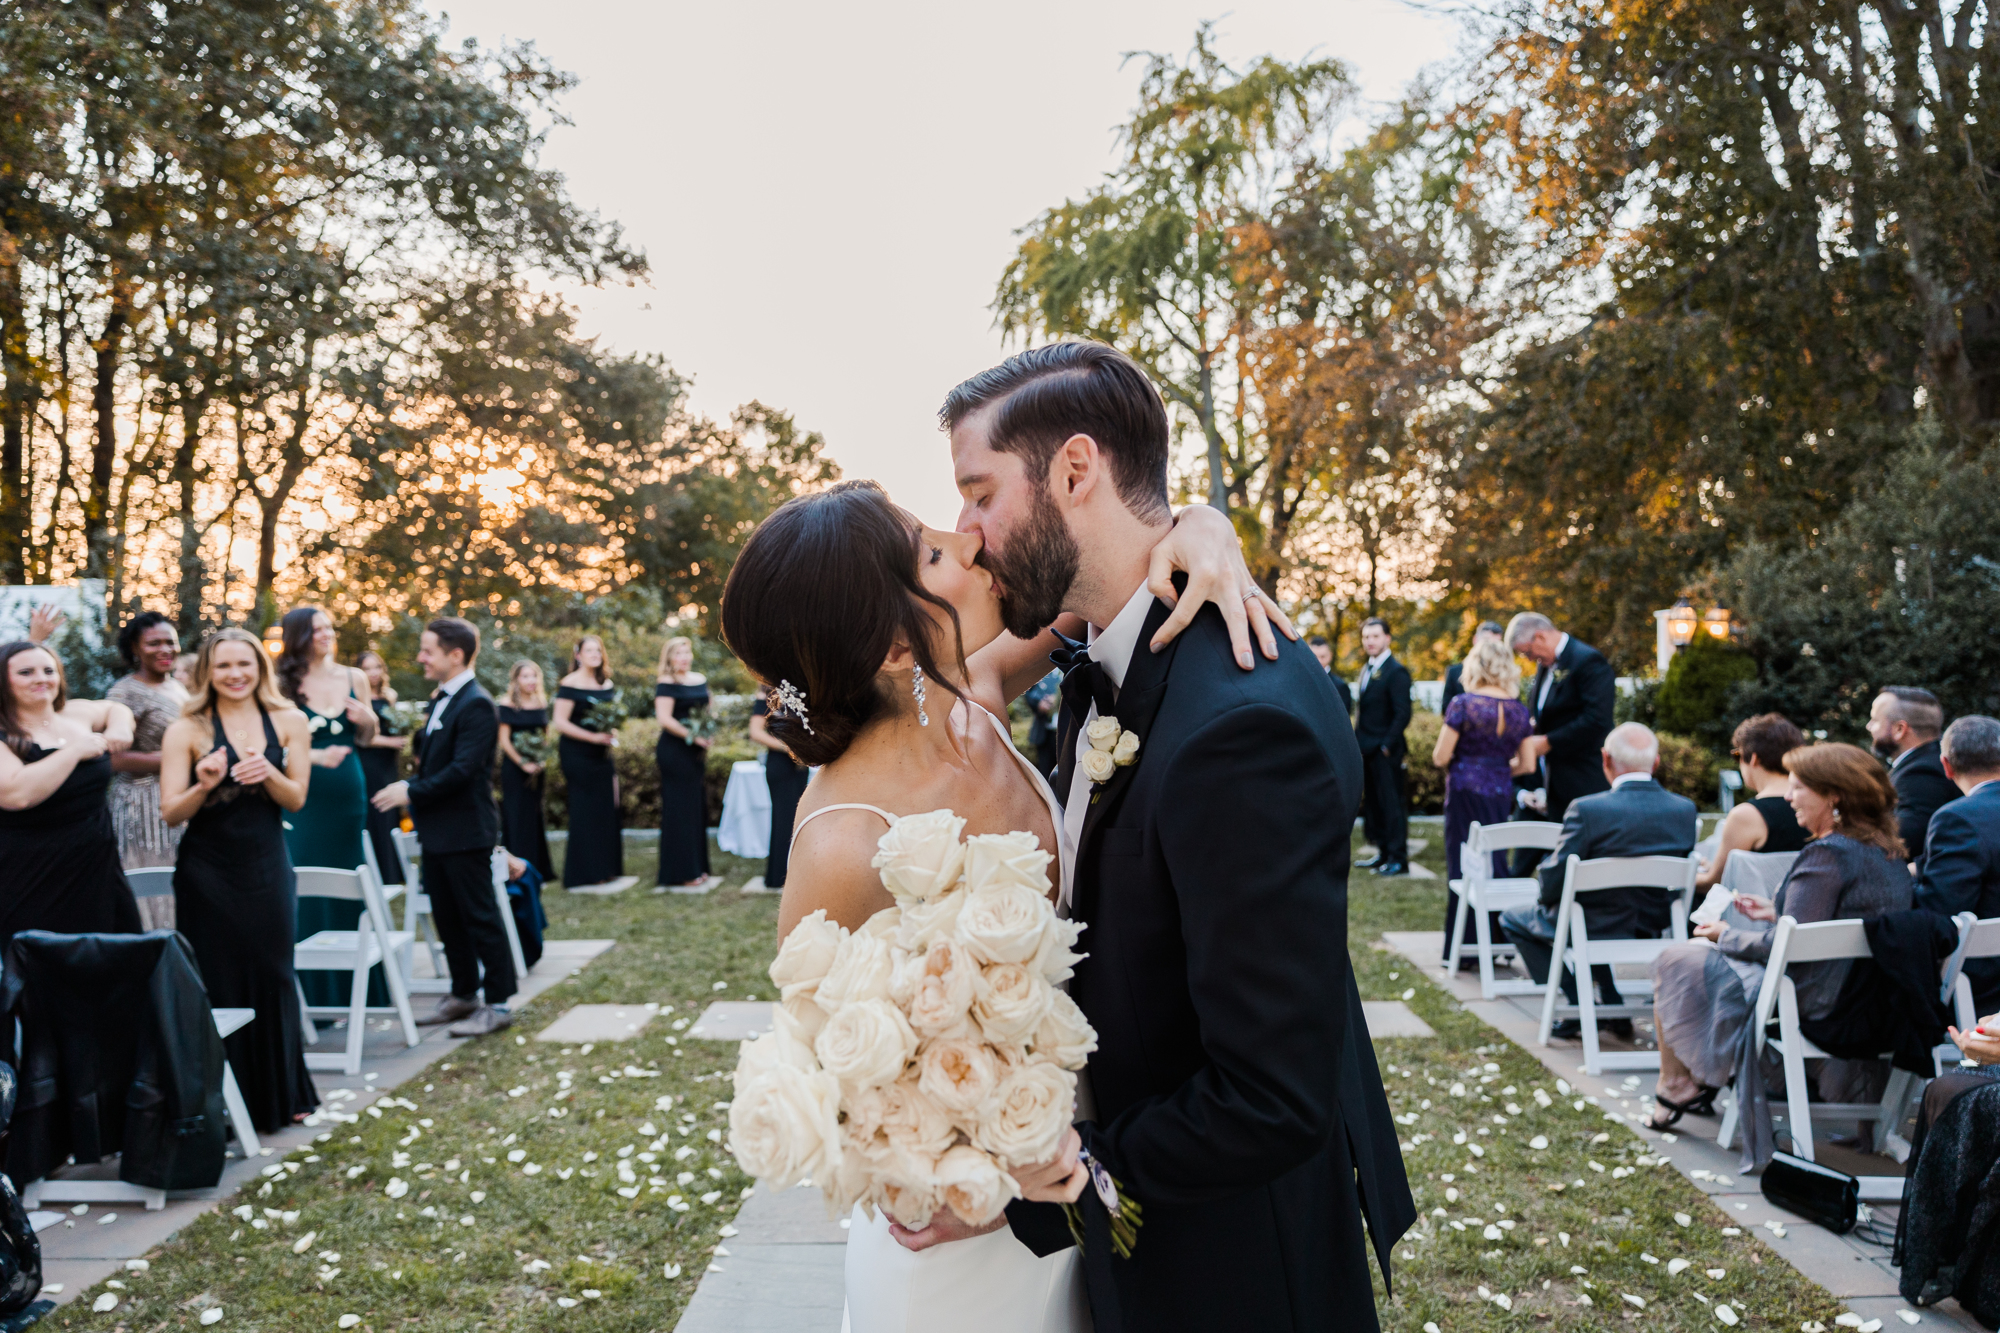 Classic Sunset Briarcliff Manor Wedding Photos in Autumn in Hudson Valley